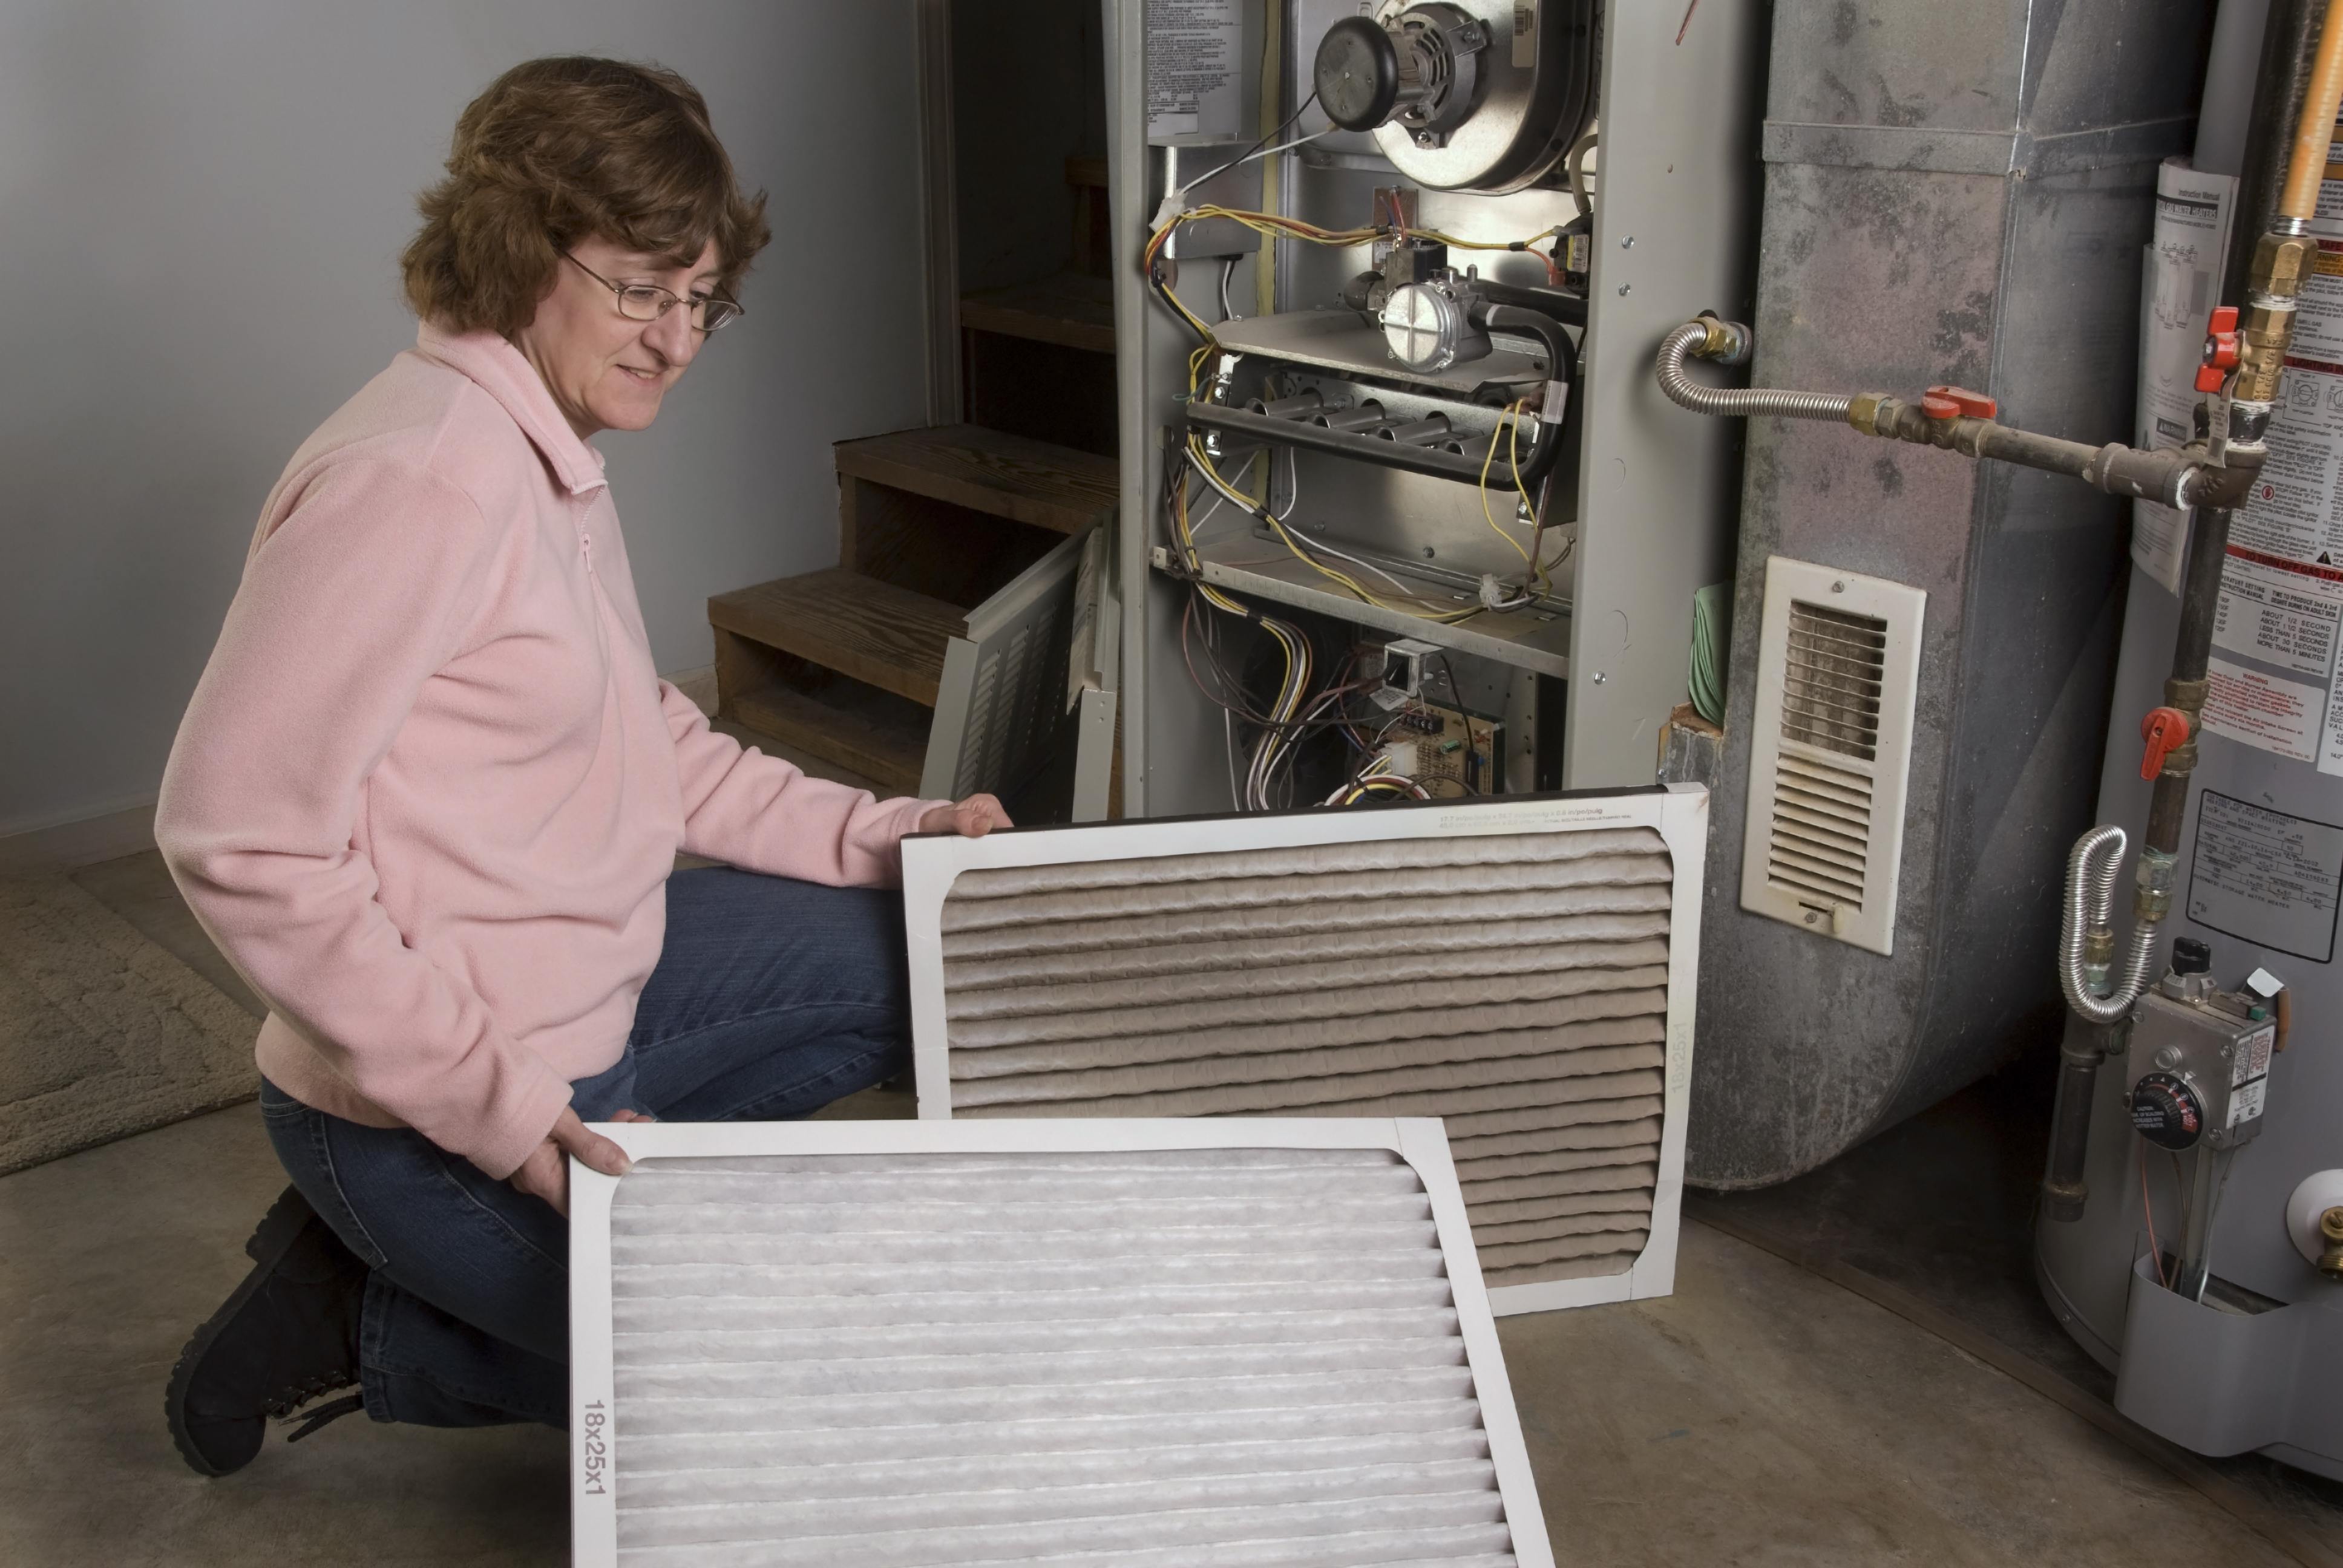 What to look for when purchasing a new gas furnace for your home